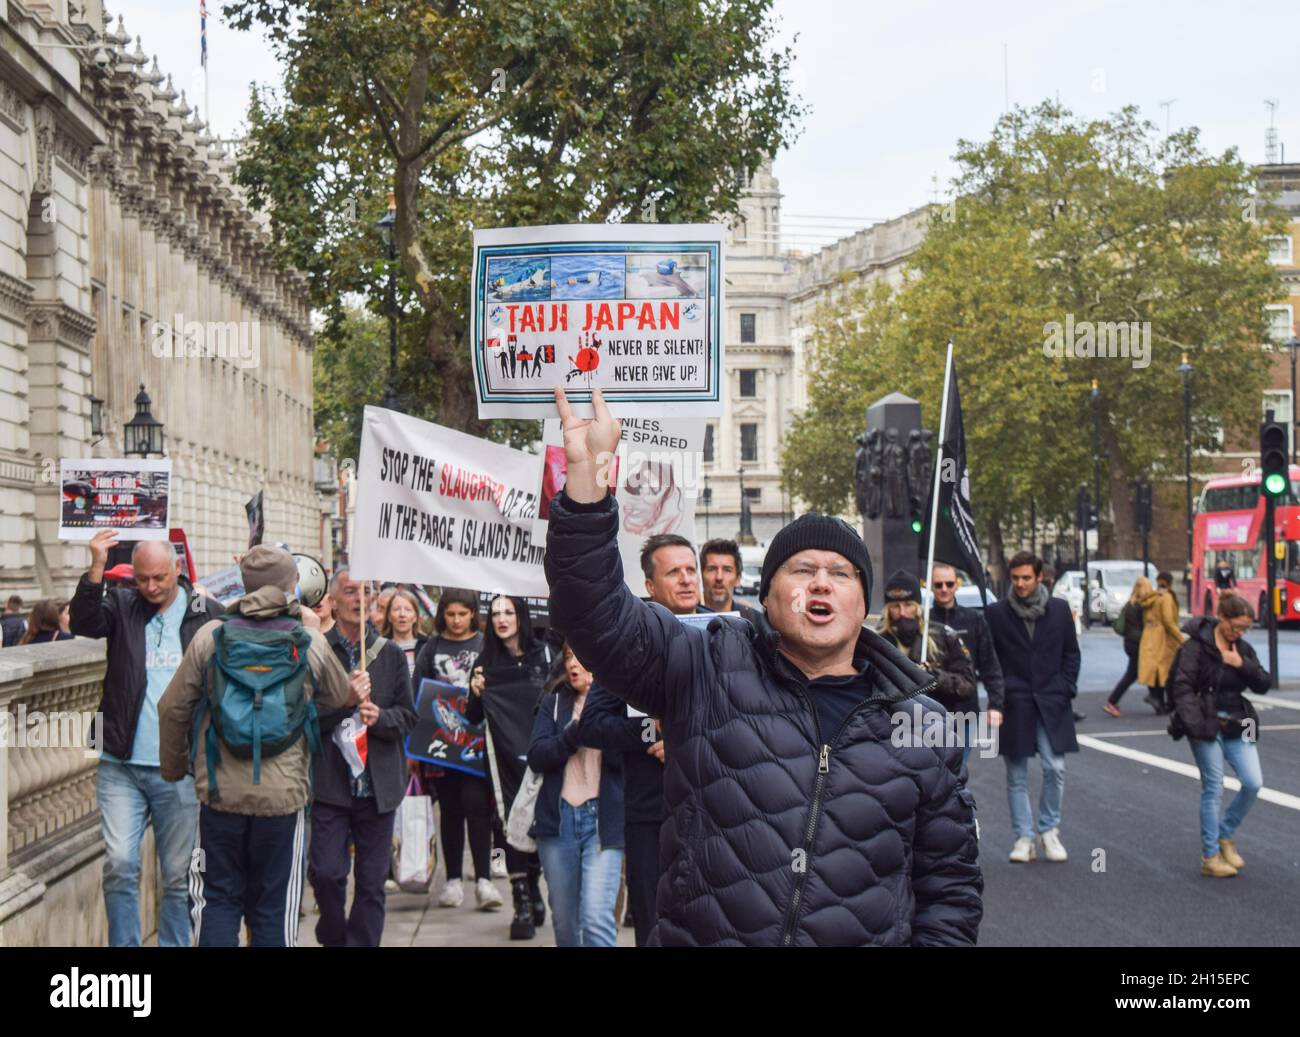 London, UK. 16th Oct, 2021. A protester holds a placard demanding an end to dolphin hunts in Taiji during the demonstration in Whitehall.Members of marine conservation organization Sea Shepherd and other activists marched through Westminster, calling for an end to the slaughter of dolphins in Faroe Islands and Taiji, Japan. Credit: SOPA Images Limited/Alamy Live News Stock Photo